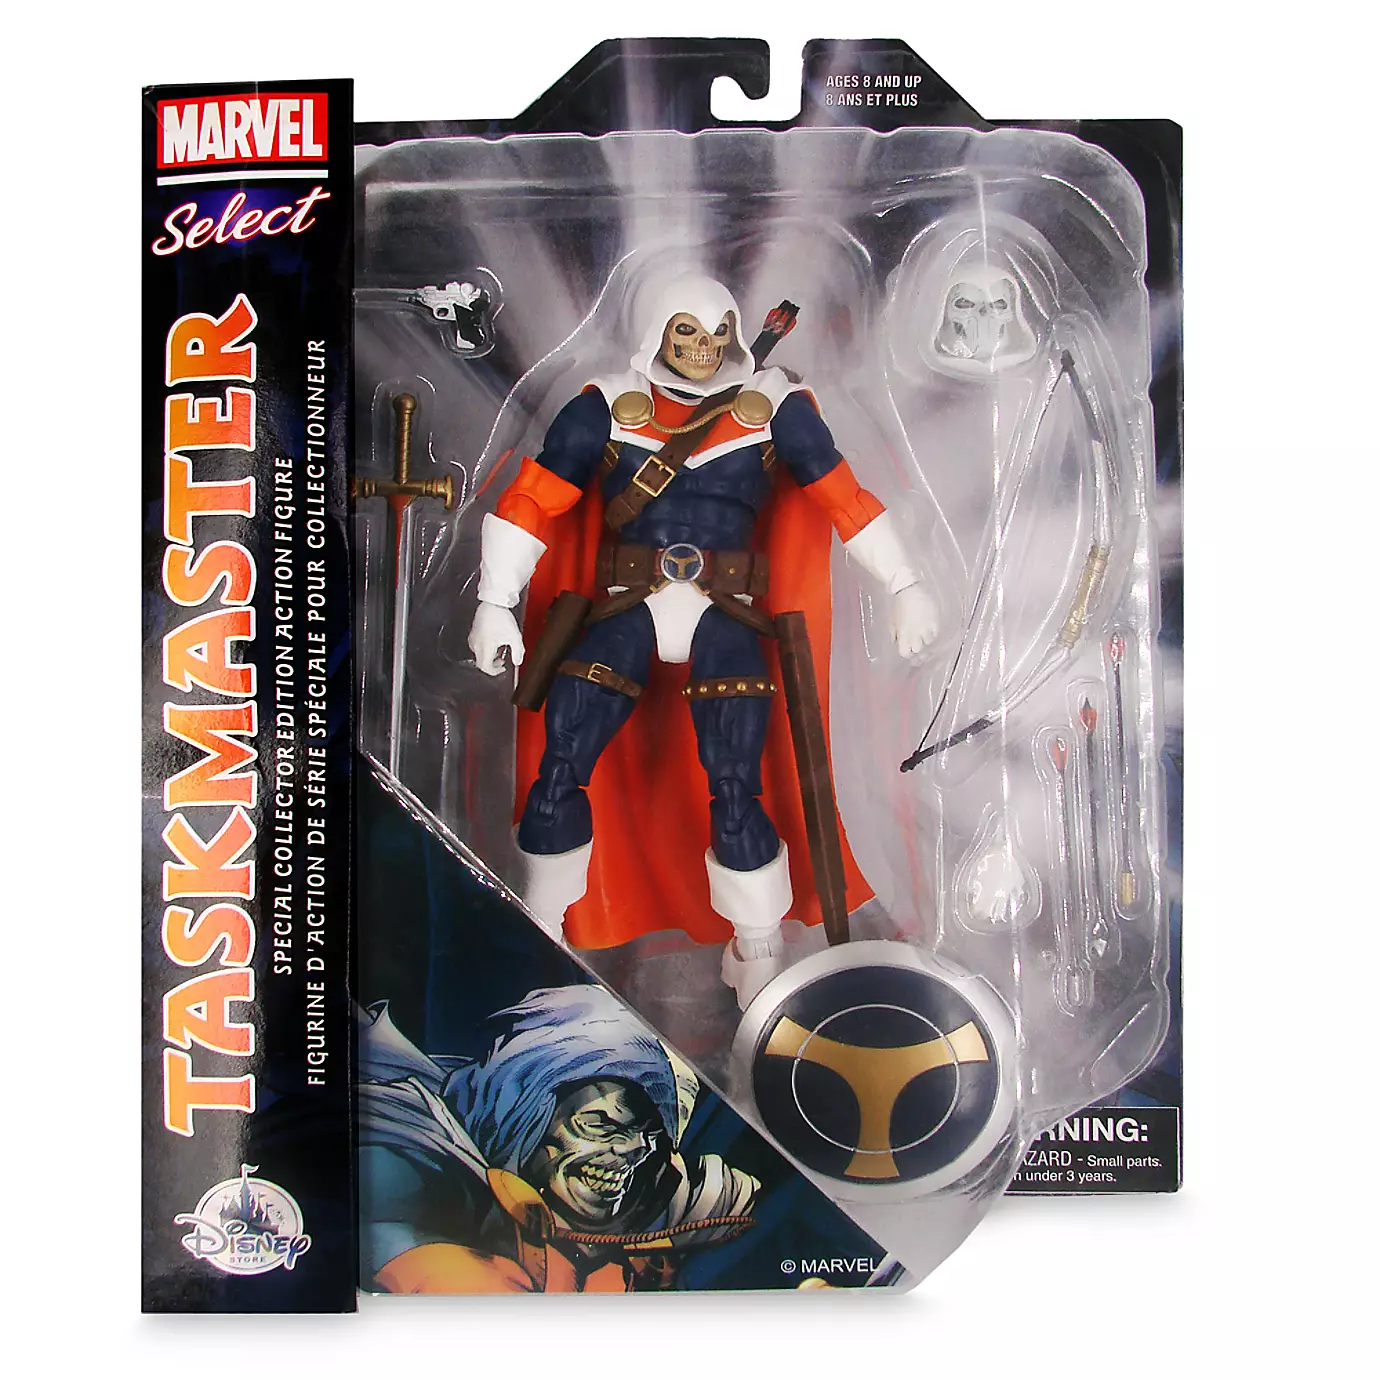 ComicStyled Taskmaster Gets a Detailed Marvel Select Figure